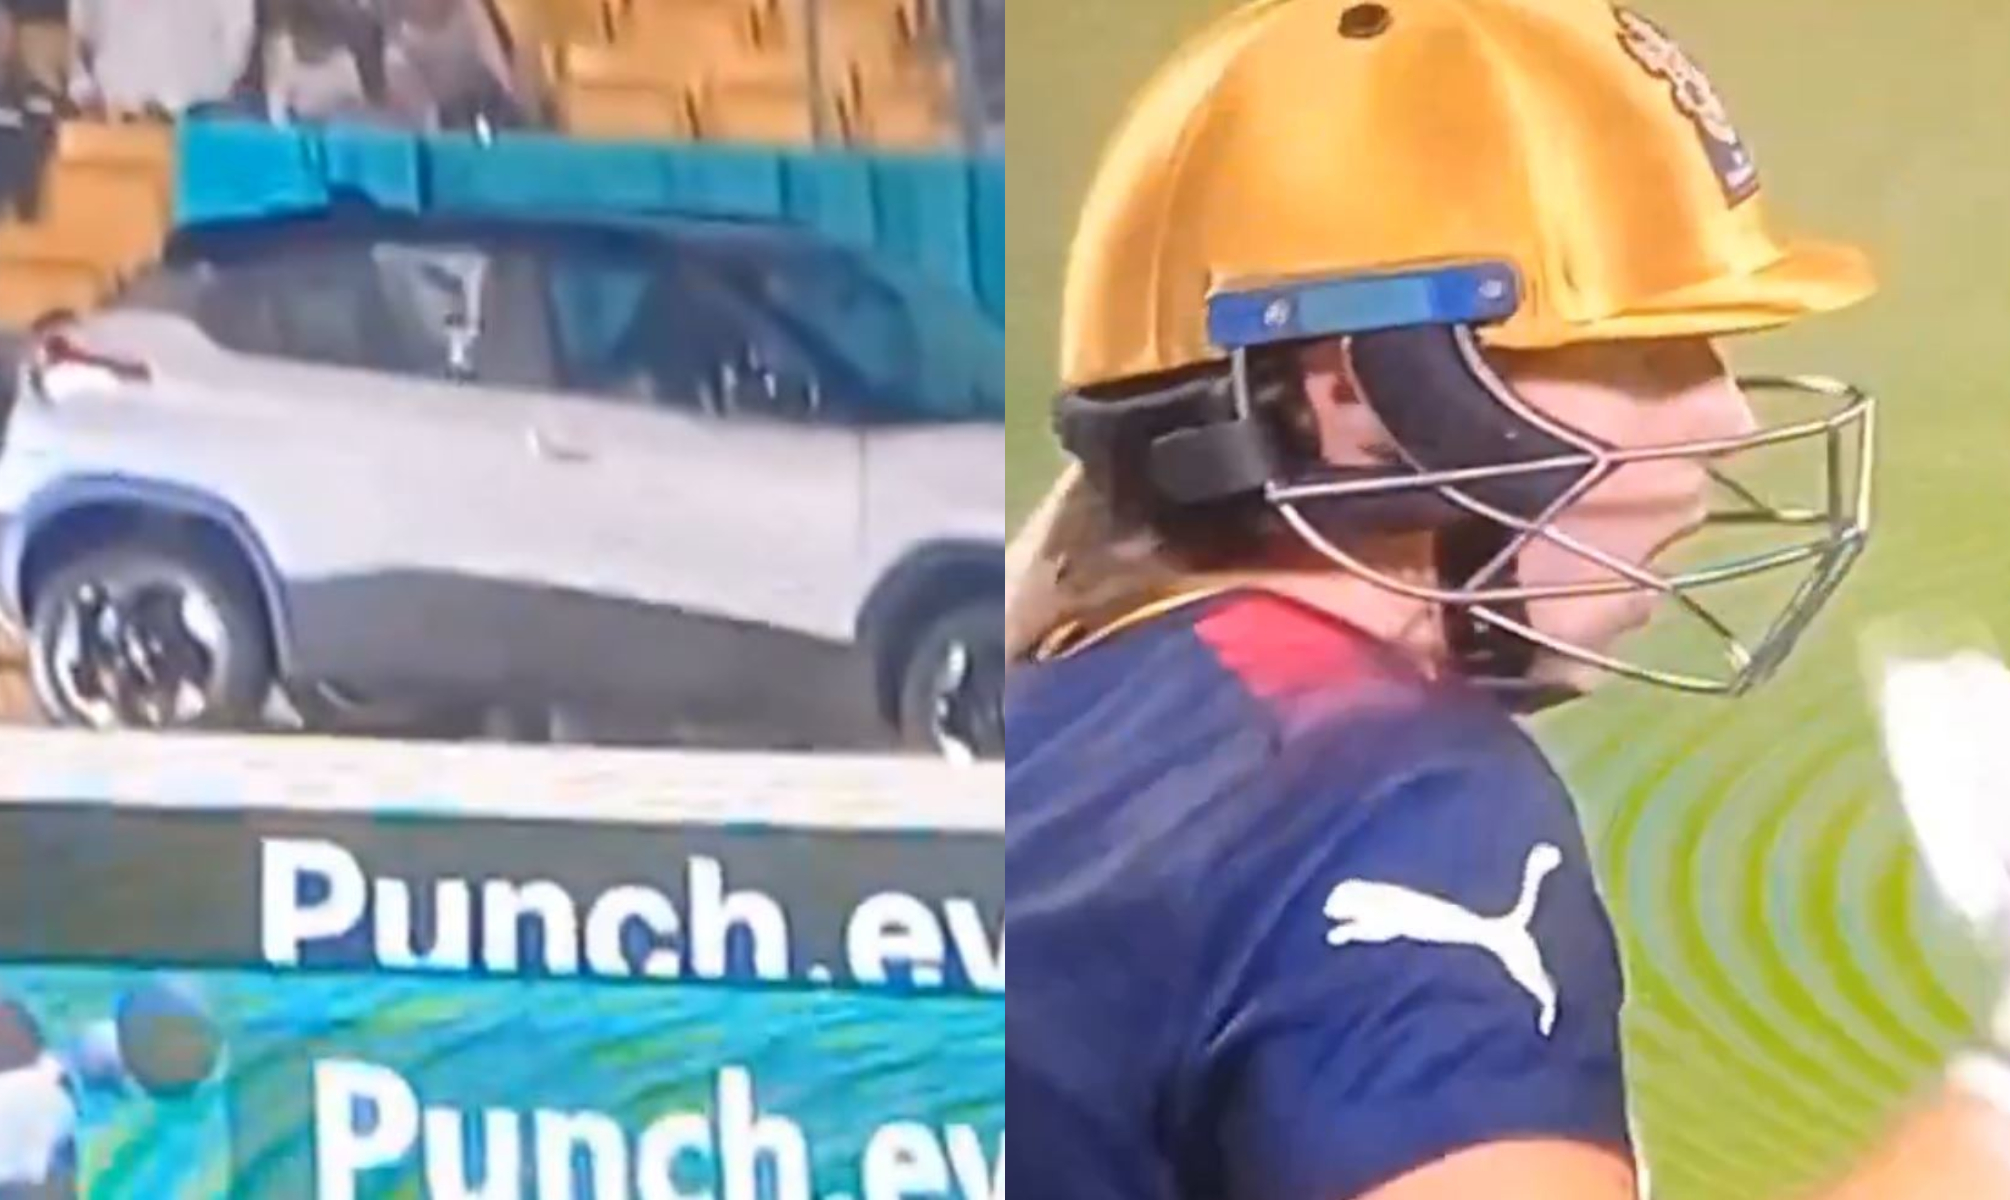 Ellyse Perry was left open mouthed after seeing her six shattering the window of the car | X